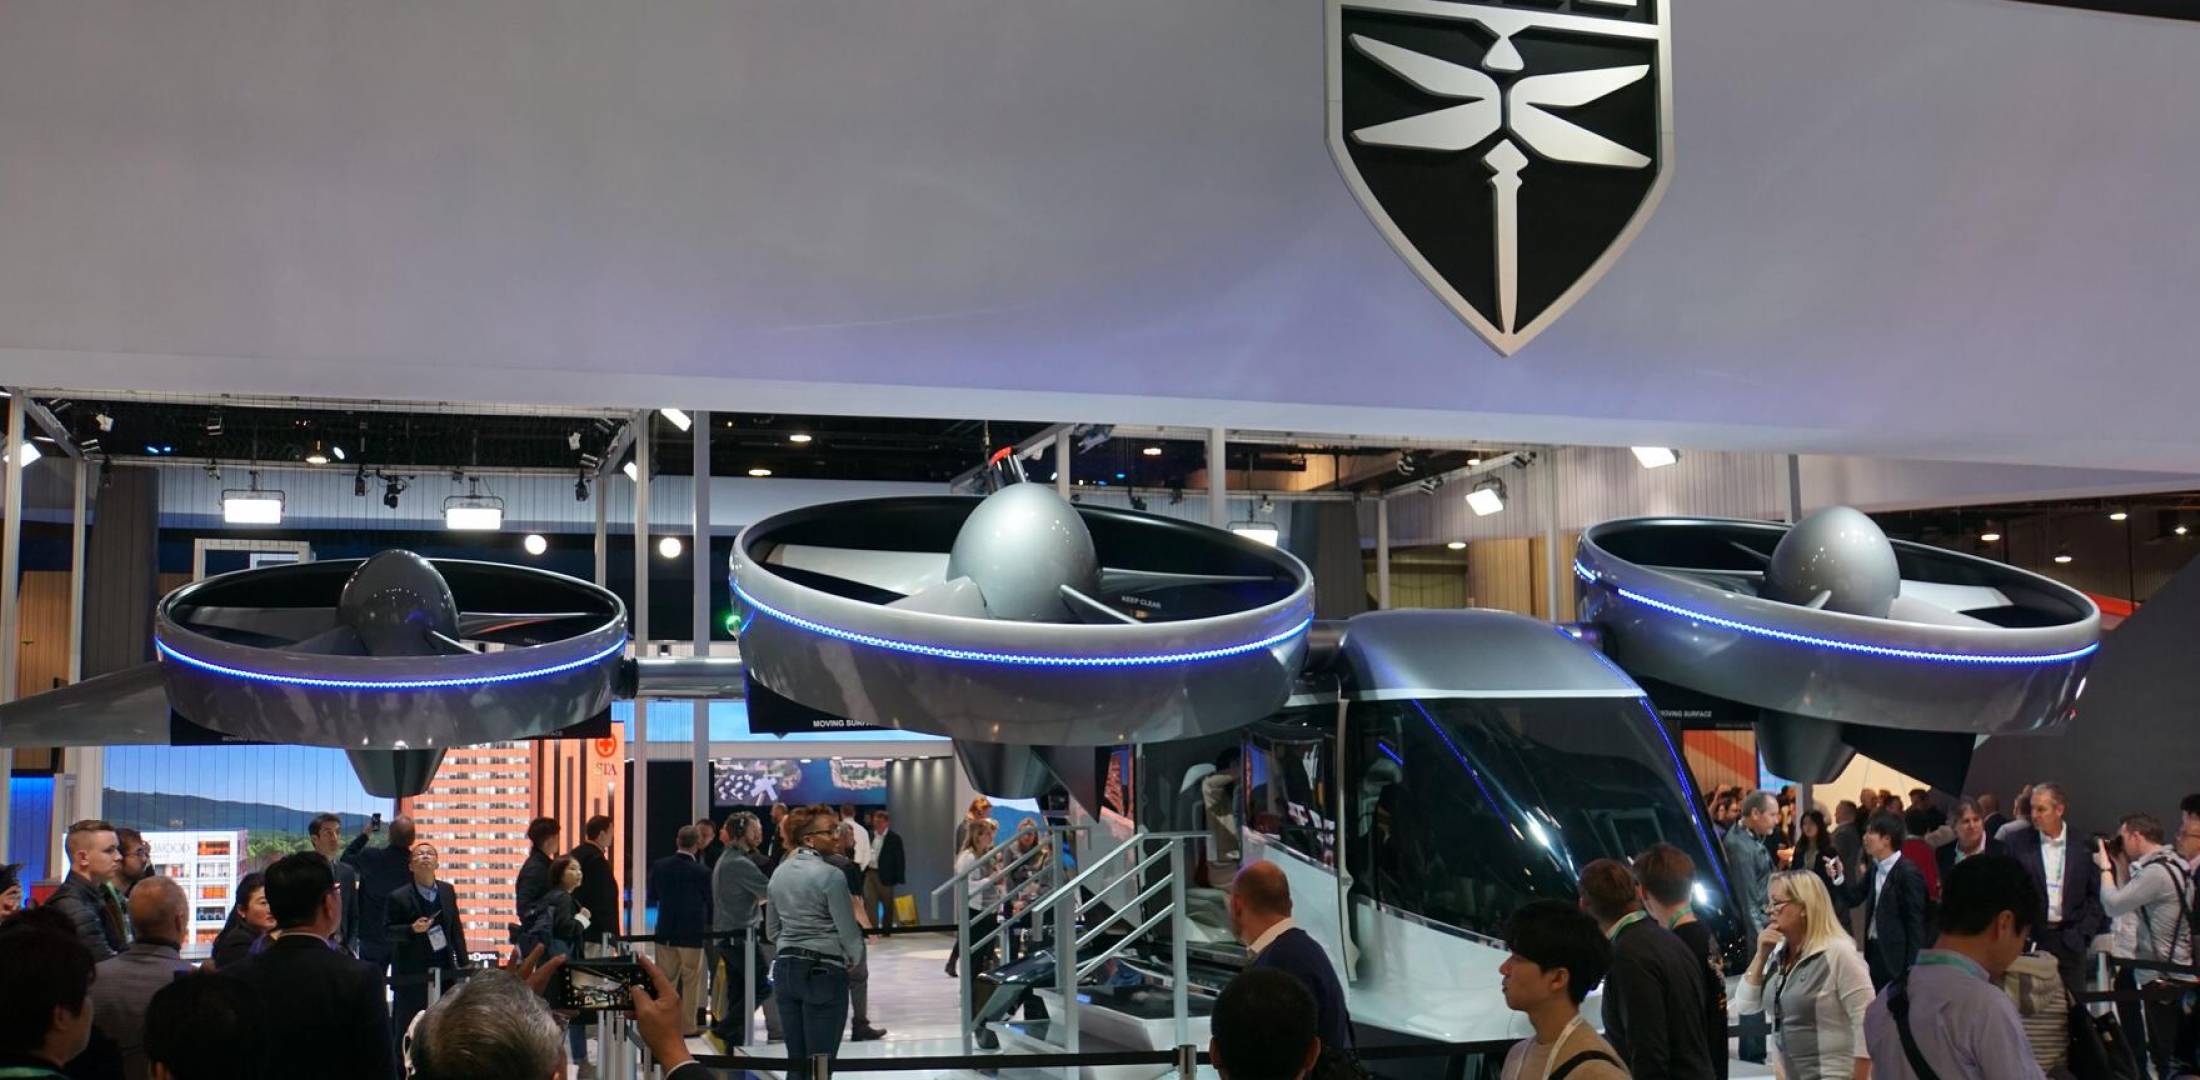 The Nexus 4EX eVTOL aircraft on display and surrounded by attendees at the Customer Electronics Show show in Las Vegas in January of 2020.